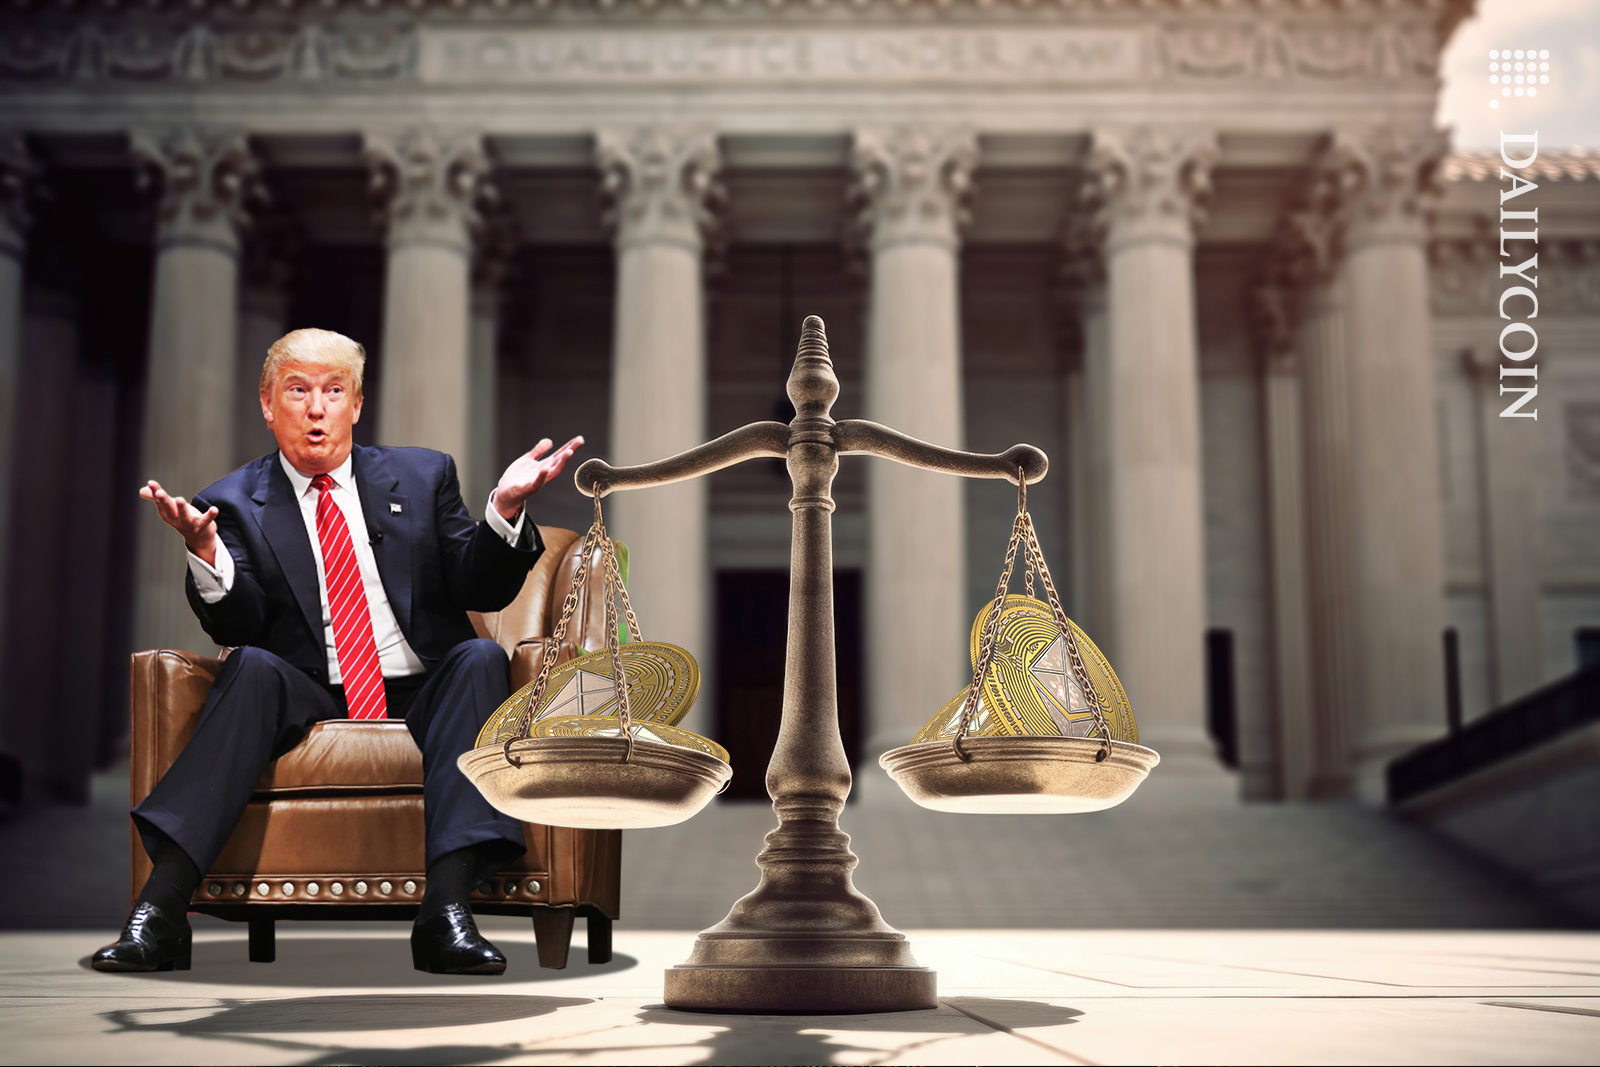 Weighing in Donald Trumps Ethereum coins in court.